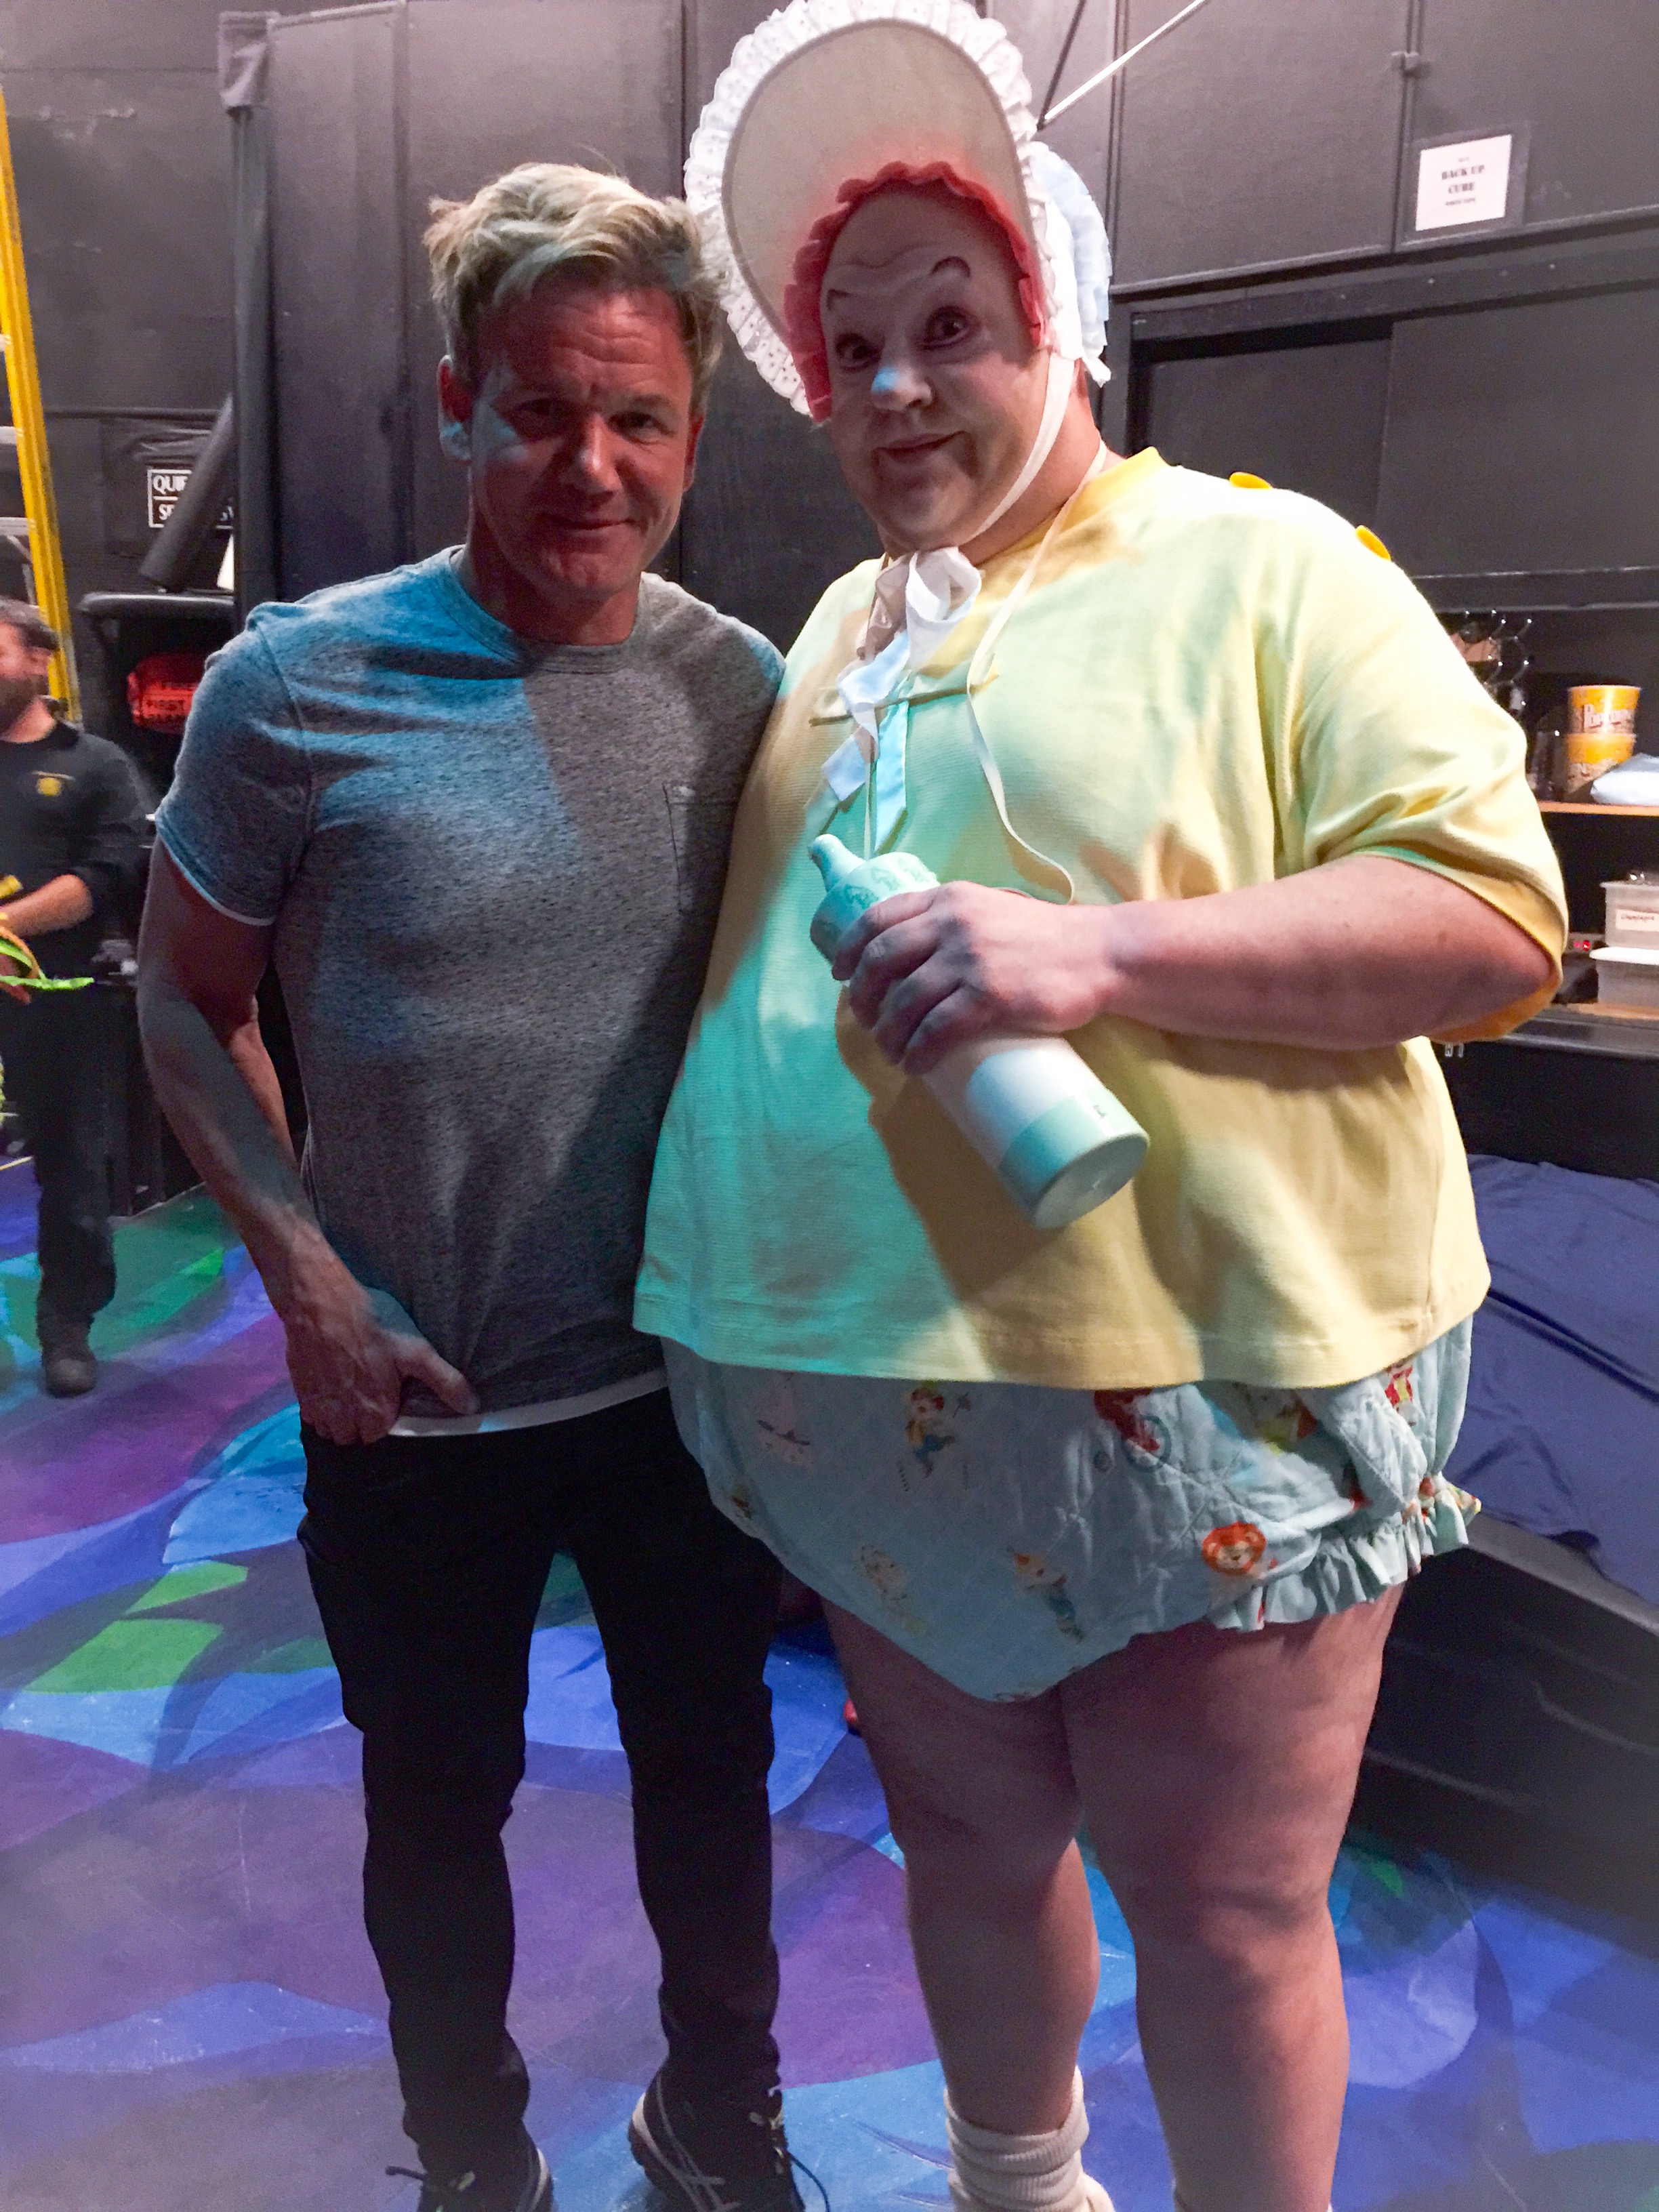 Gordon Ramsay poses with the famous gigantic baby from Mystere by Cirque du Soleil.